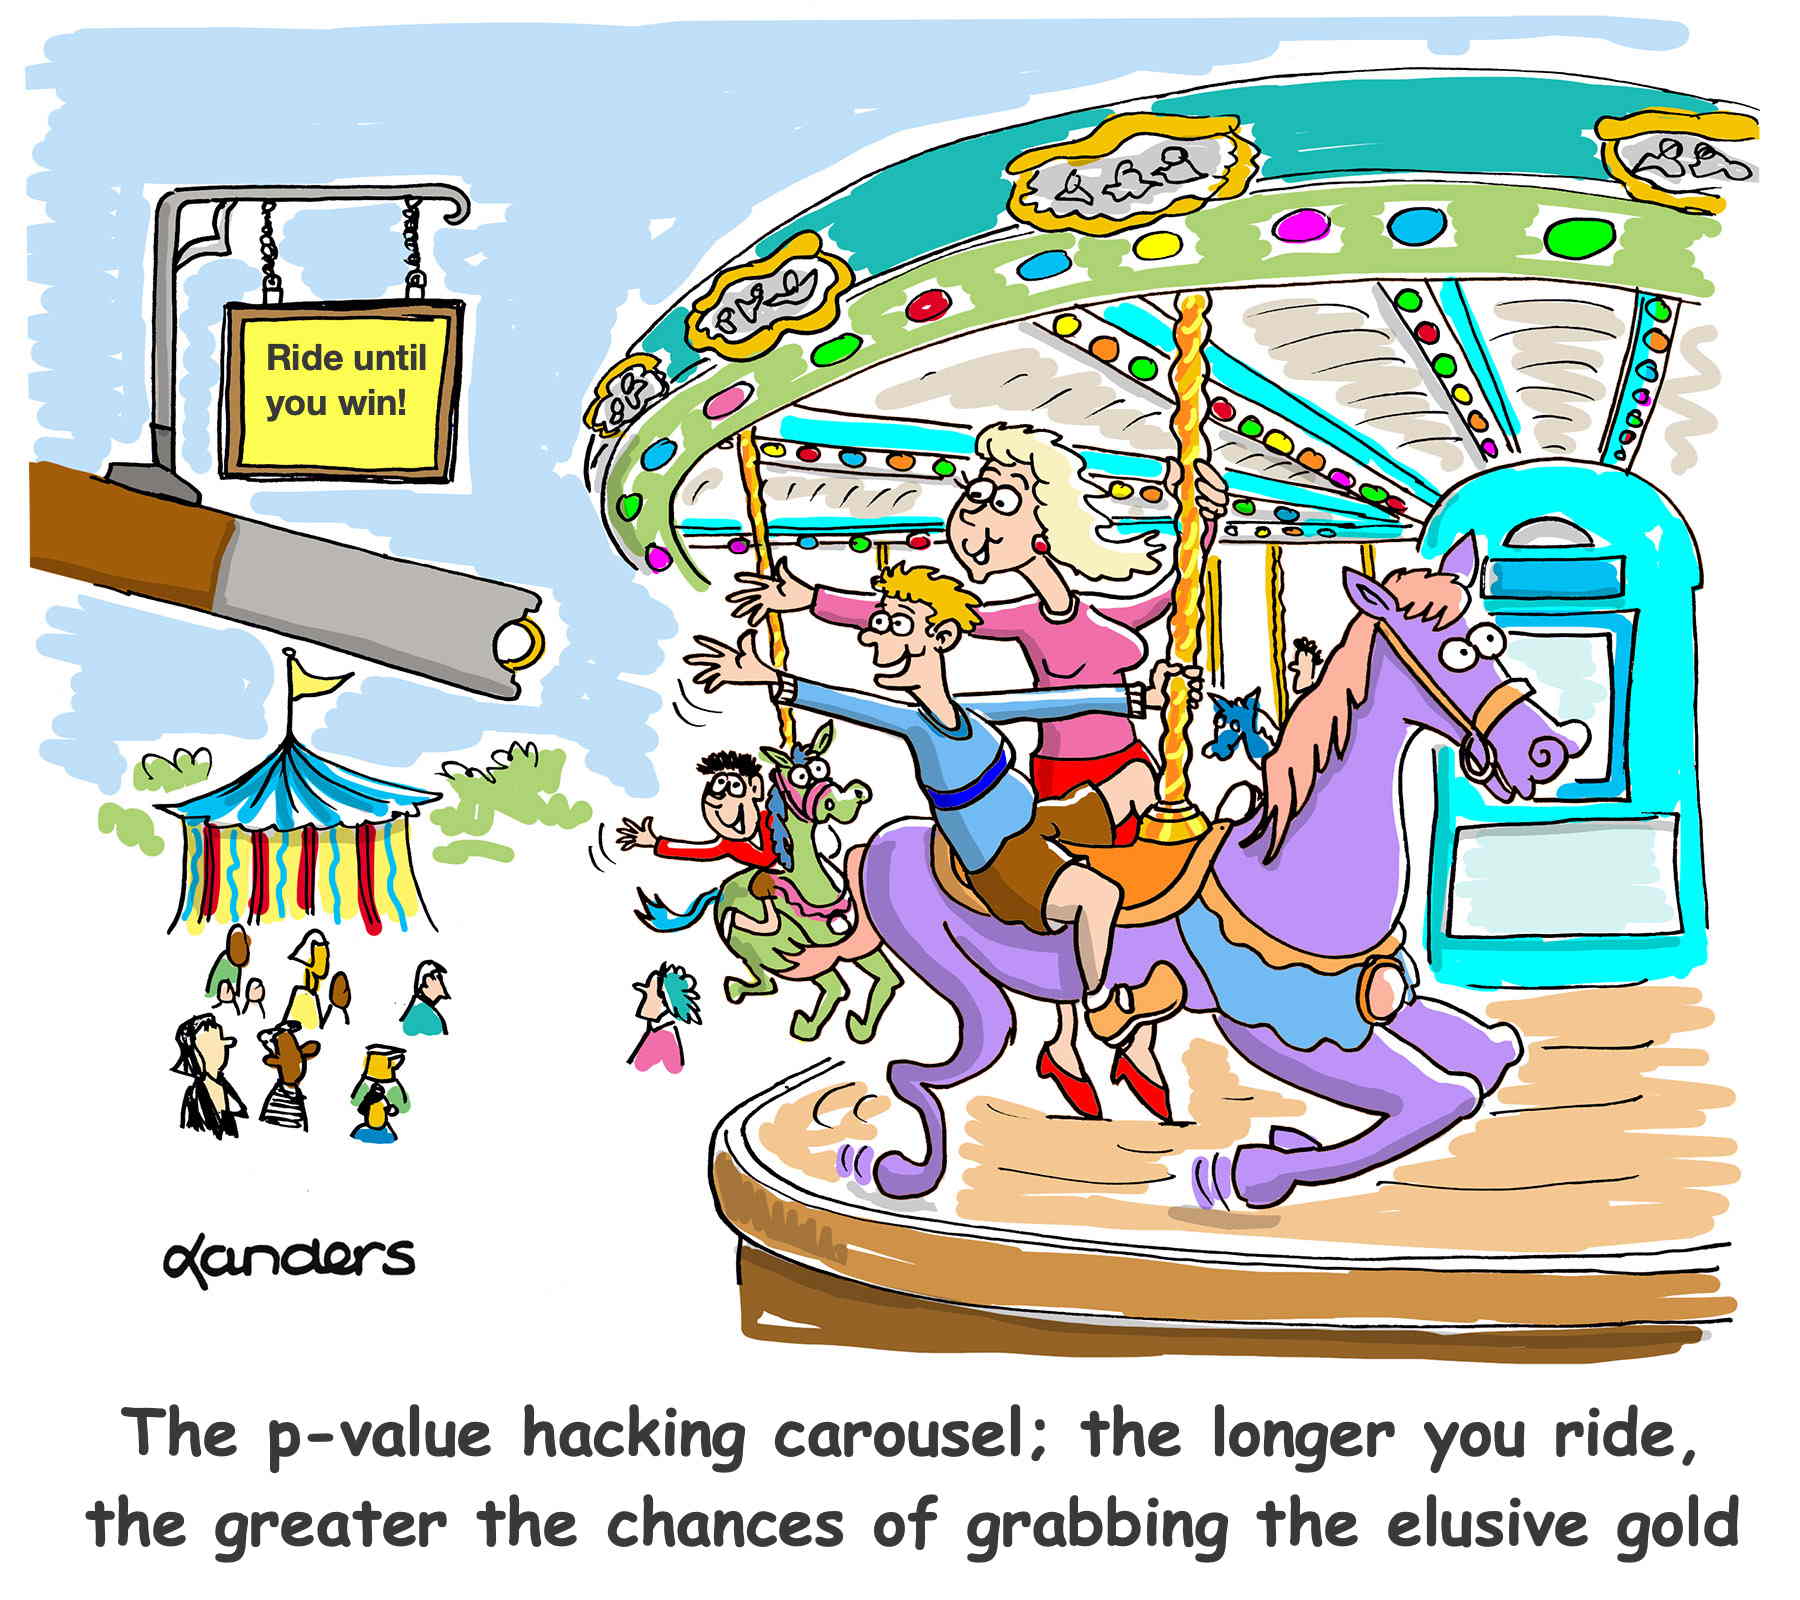 cartoon with people on a merry-go-round reaching for the brass ring with sign saying  'ride until you win!'. Caption says: The p-value hacking carousel; the longer you ride, the greater the chances of grabbing the elusive gold